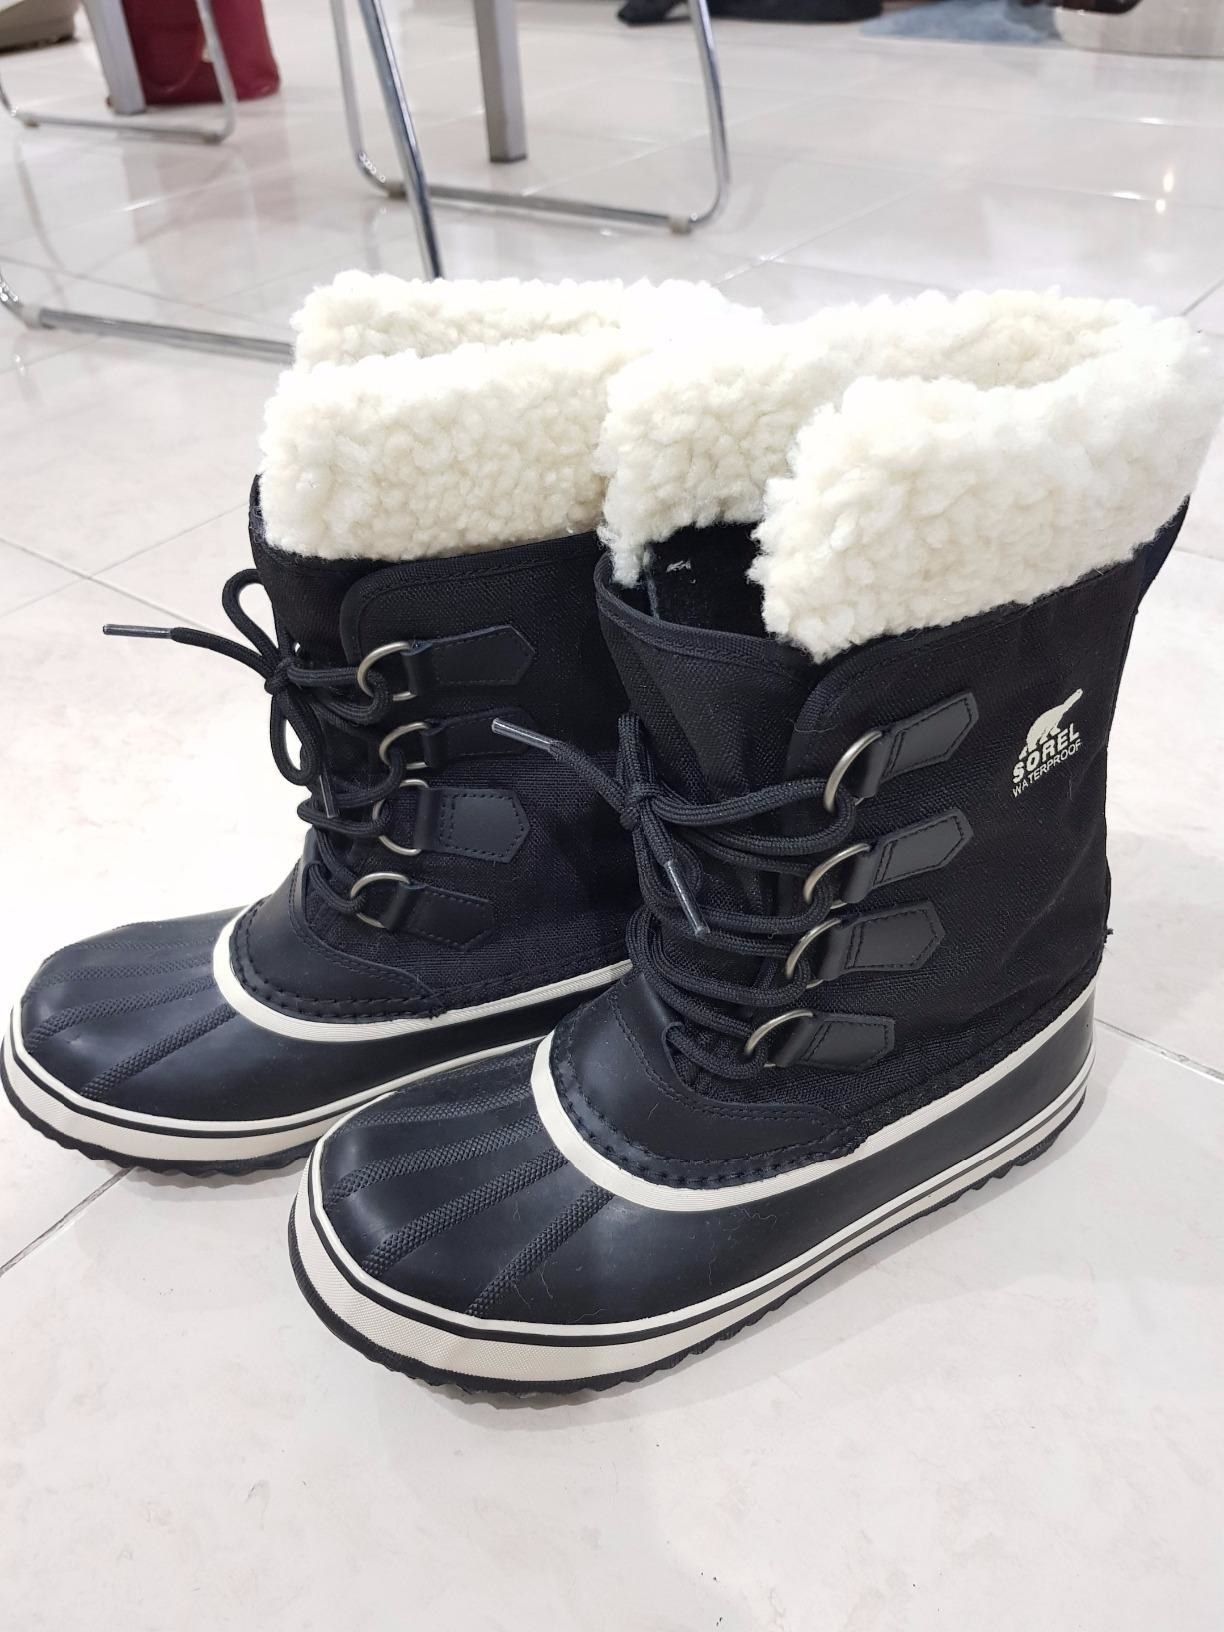 Fashion Women Floral Knee HIgh Boots Pull On Warm Fur lining Shoes Winter Plus 